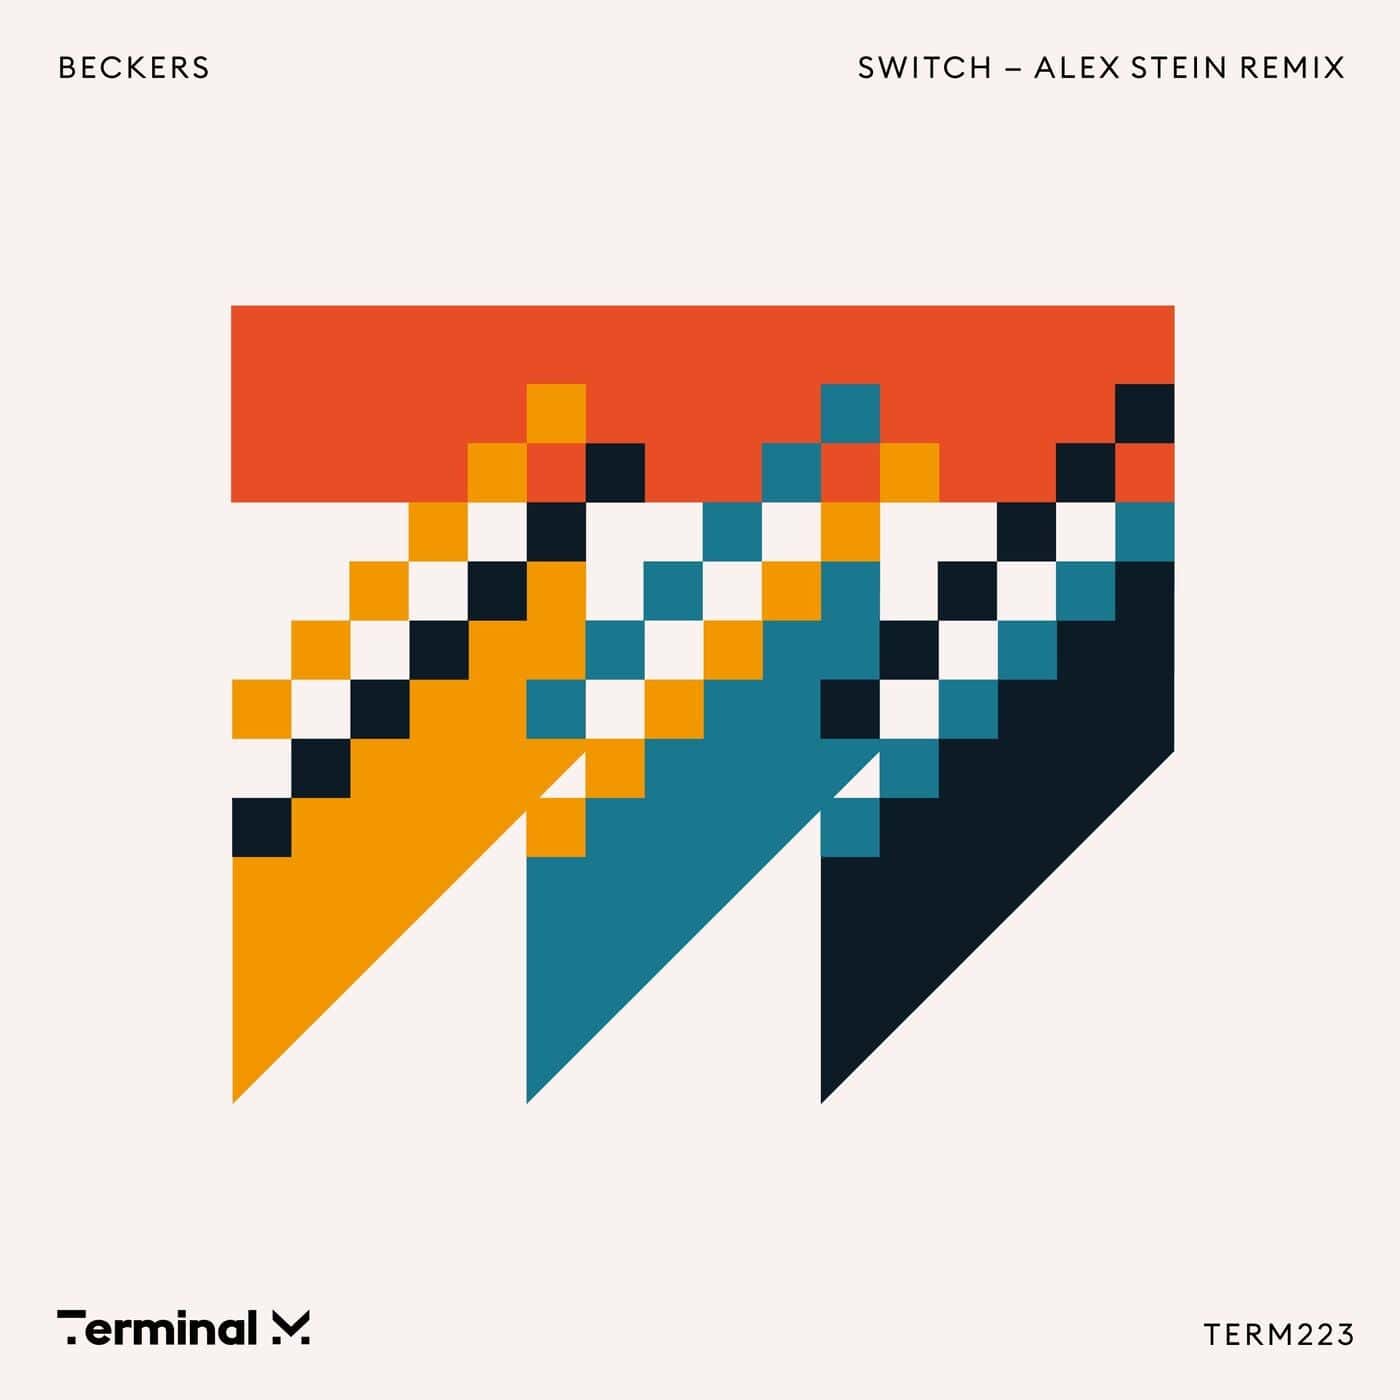 image cover: Beckers - Switch (Alex Stein Remix) / TERM223